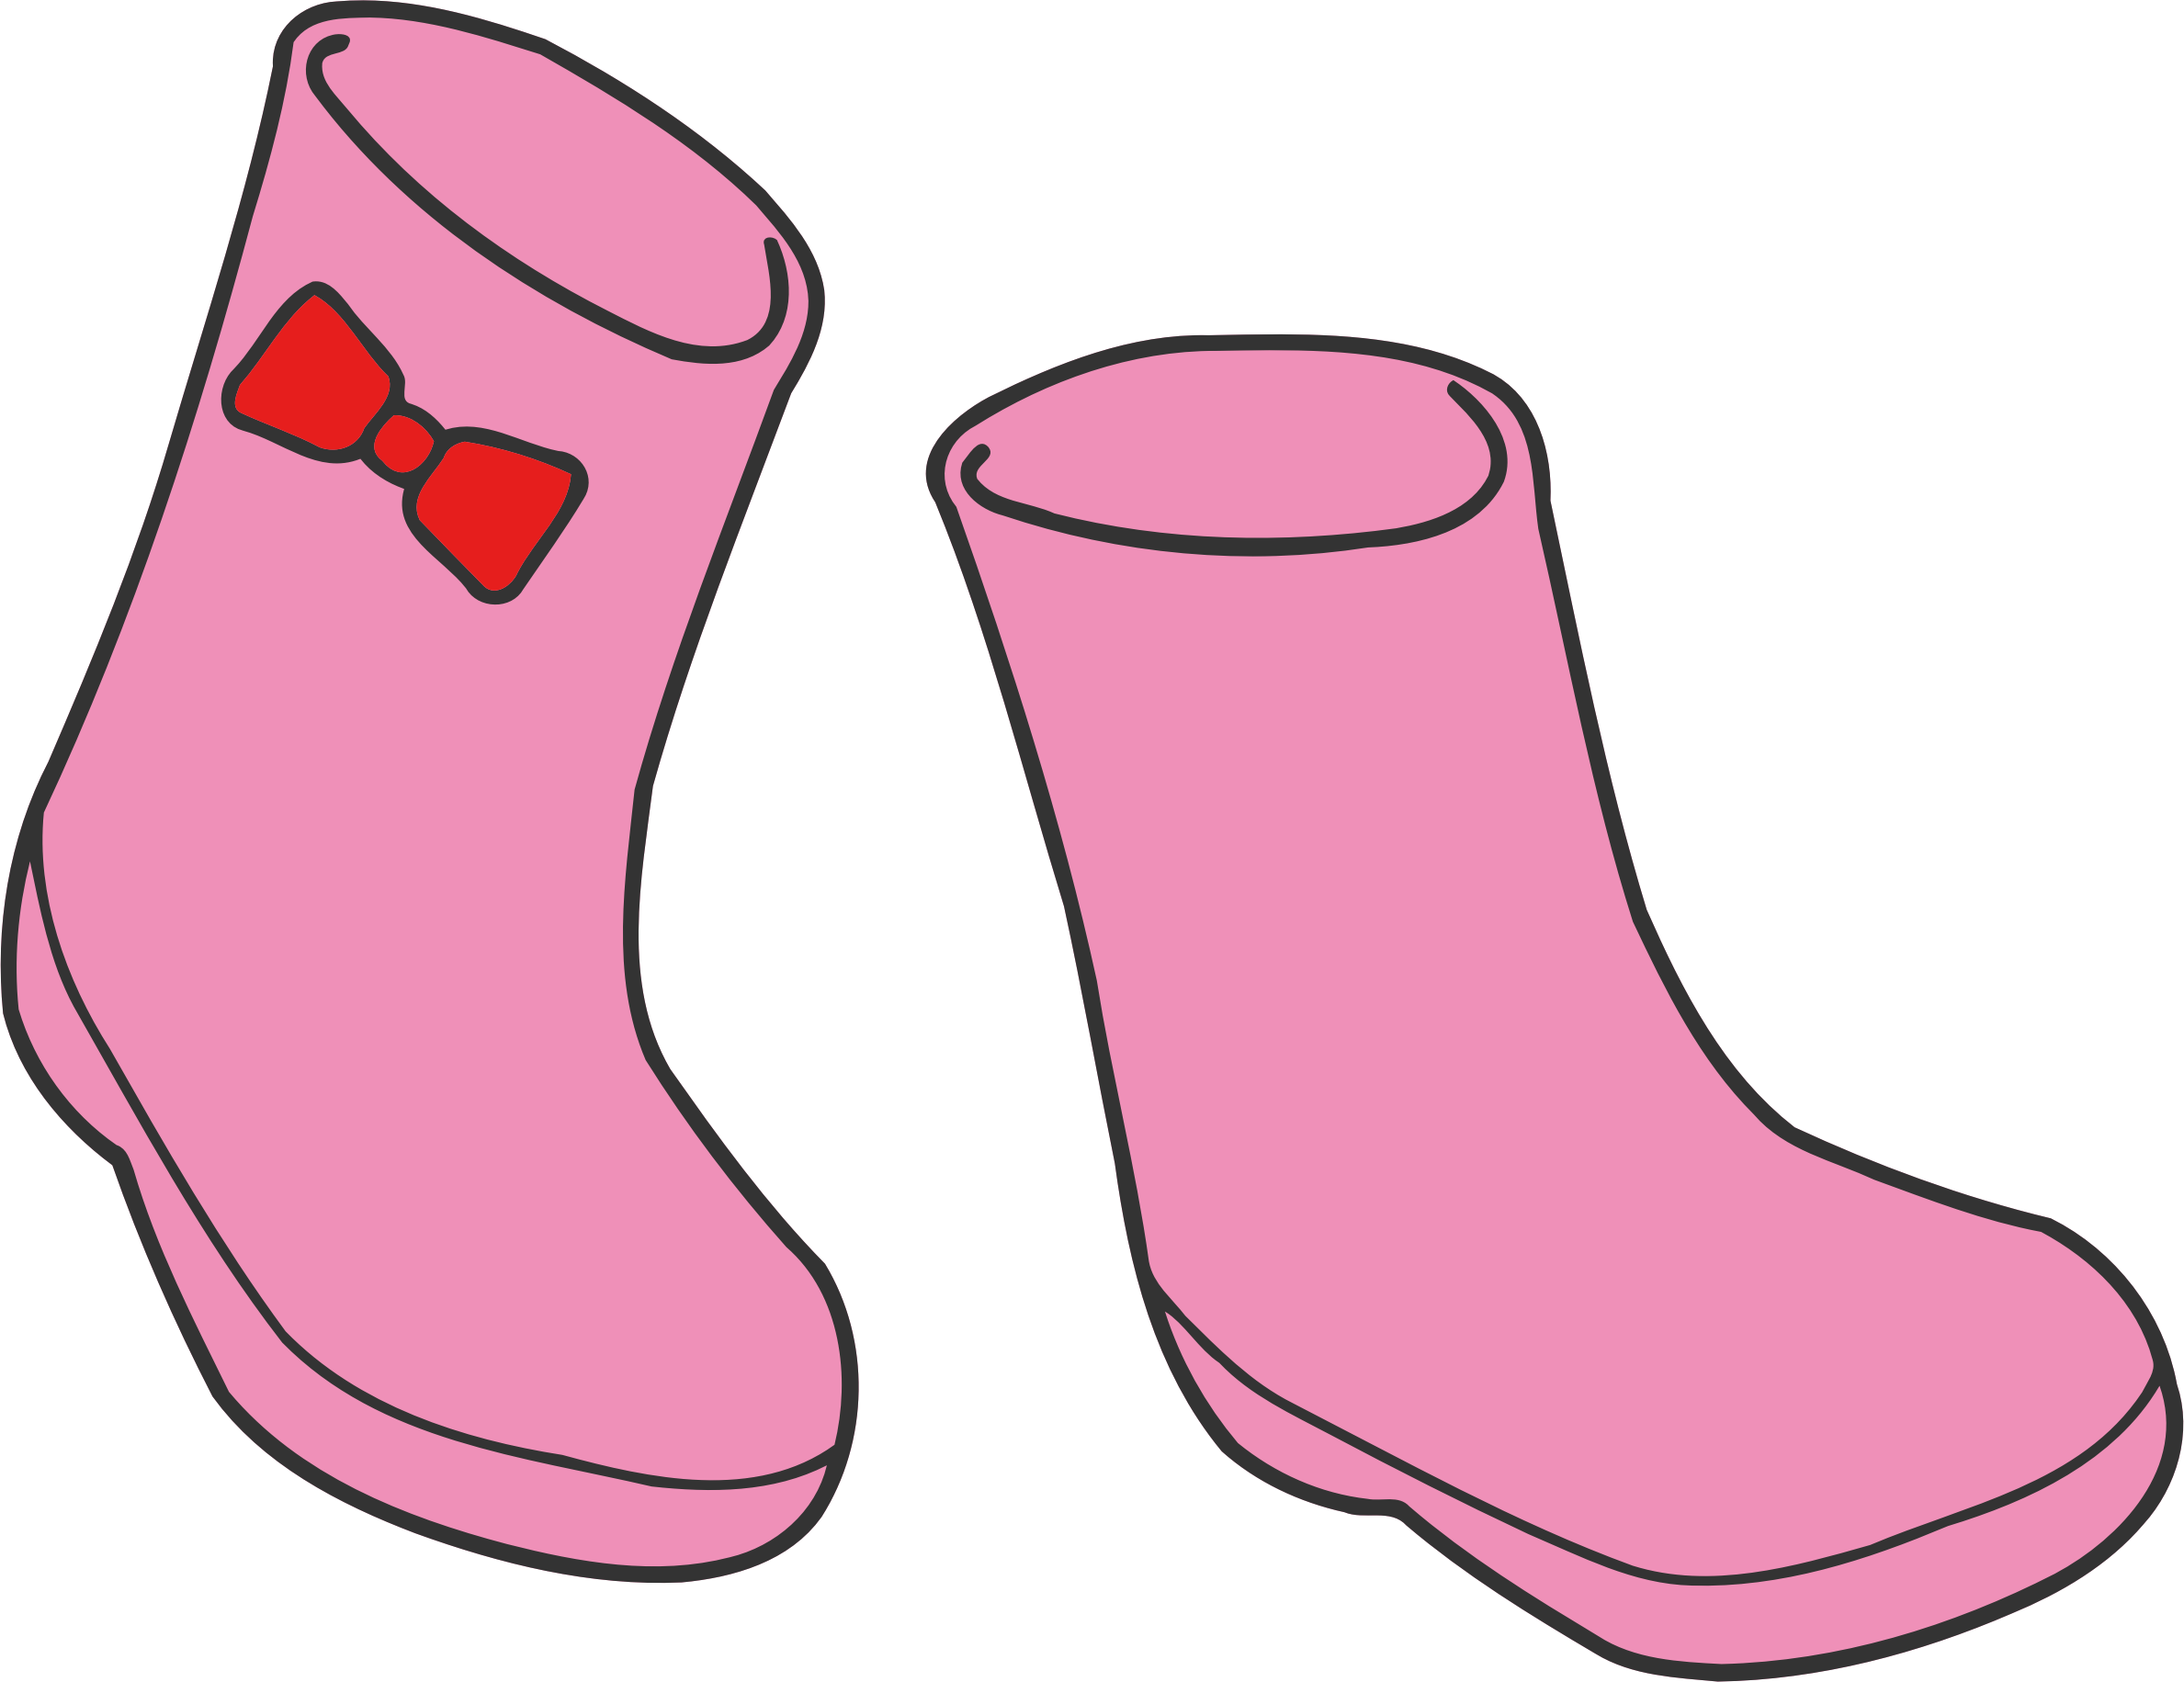 Boots clipart welly boot, Boots welly boot Transparent ...